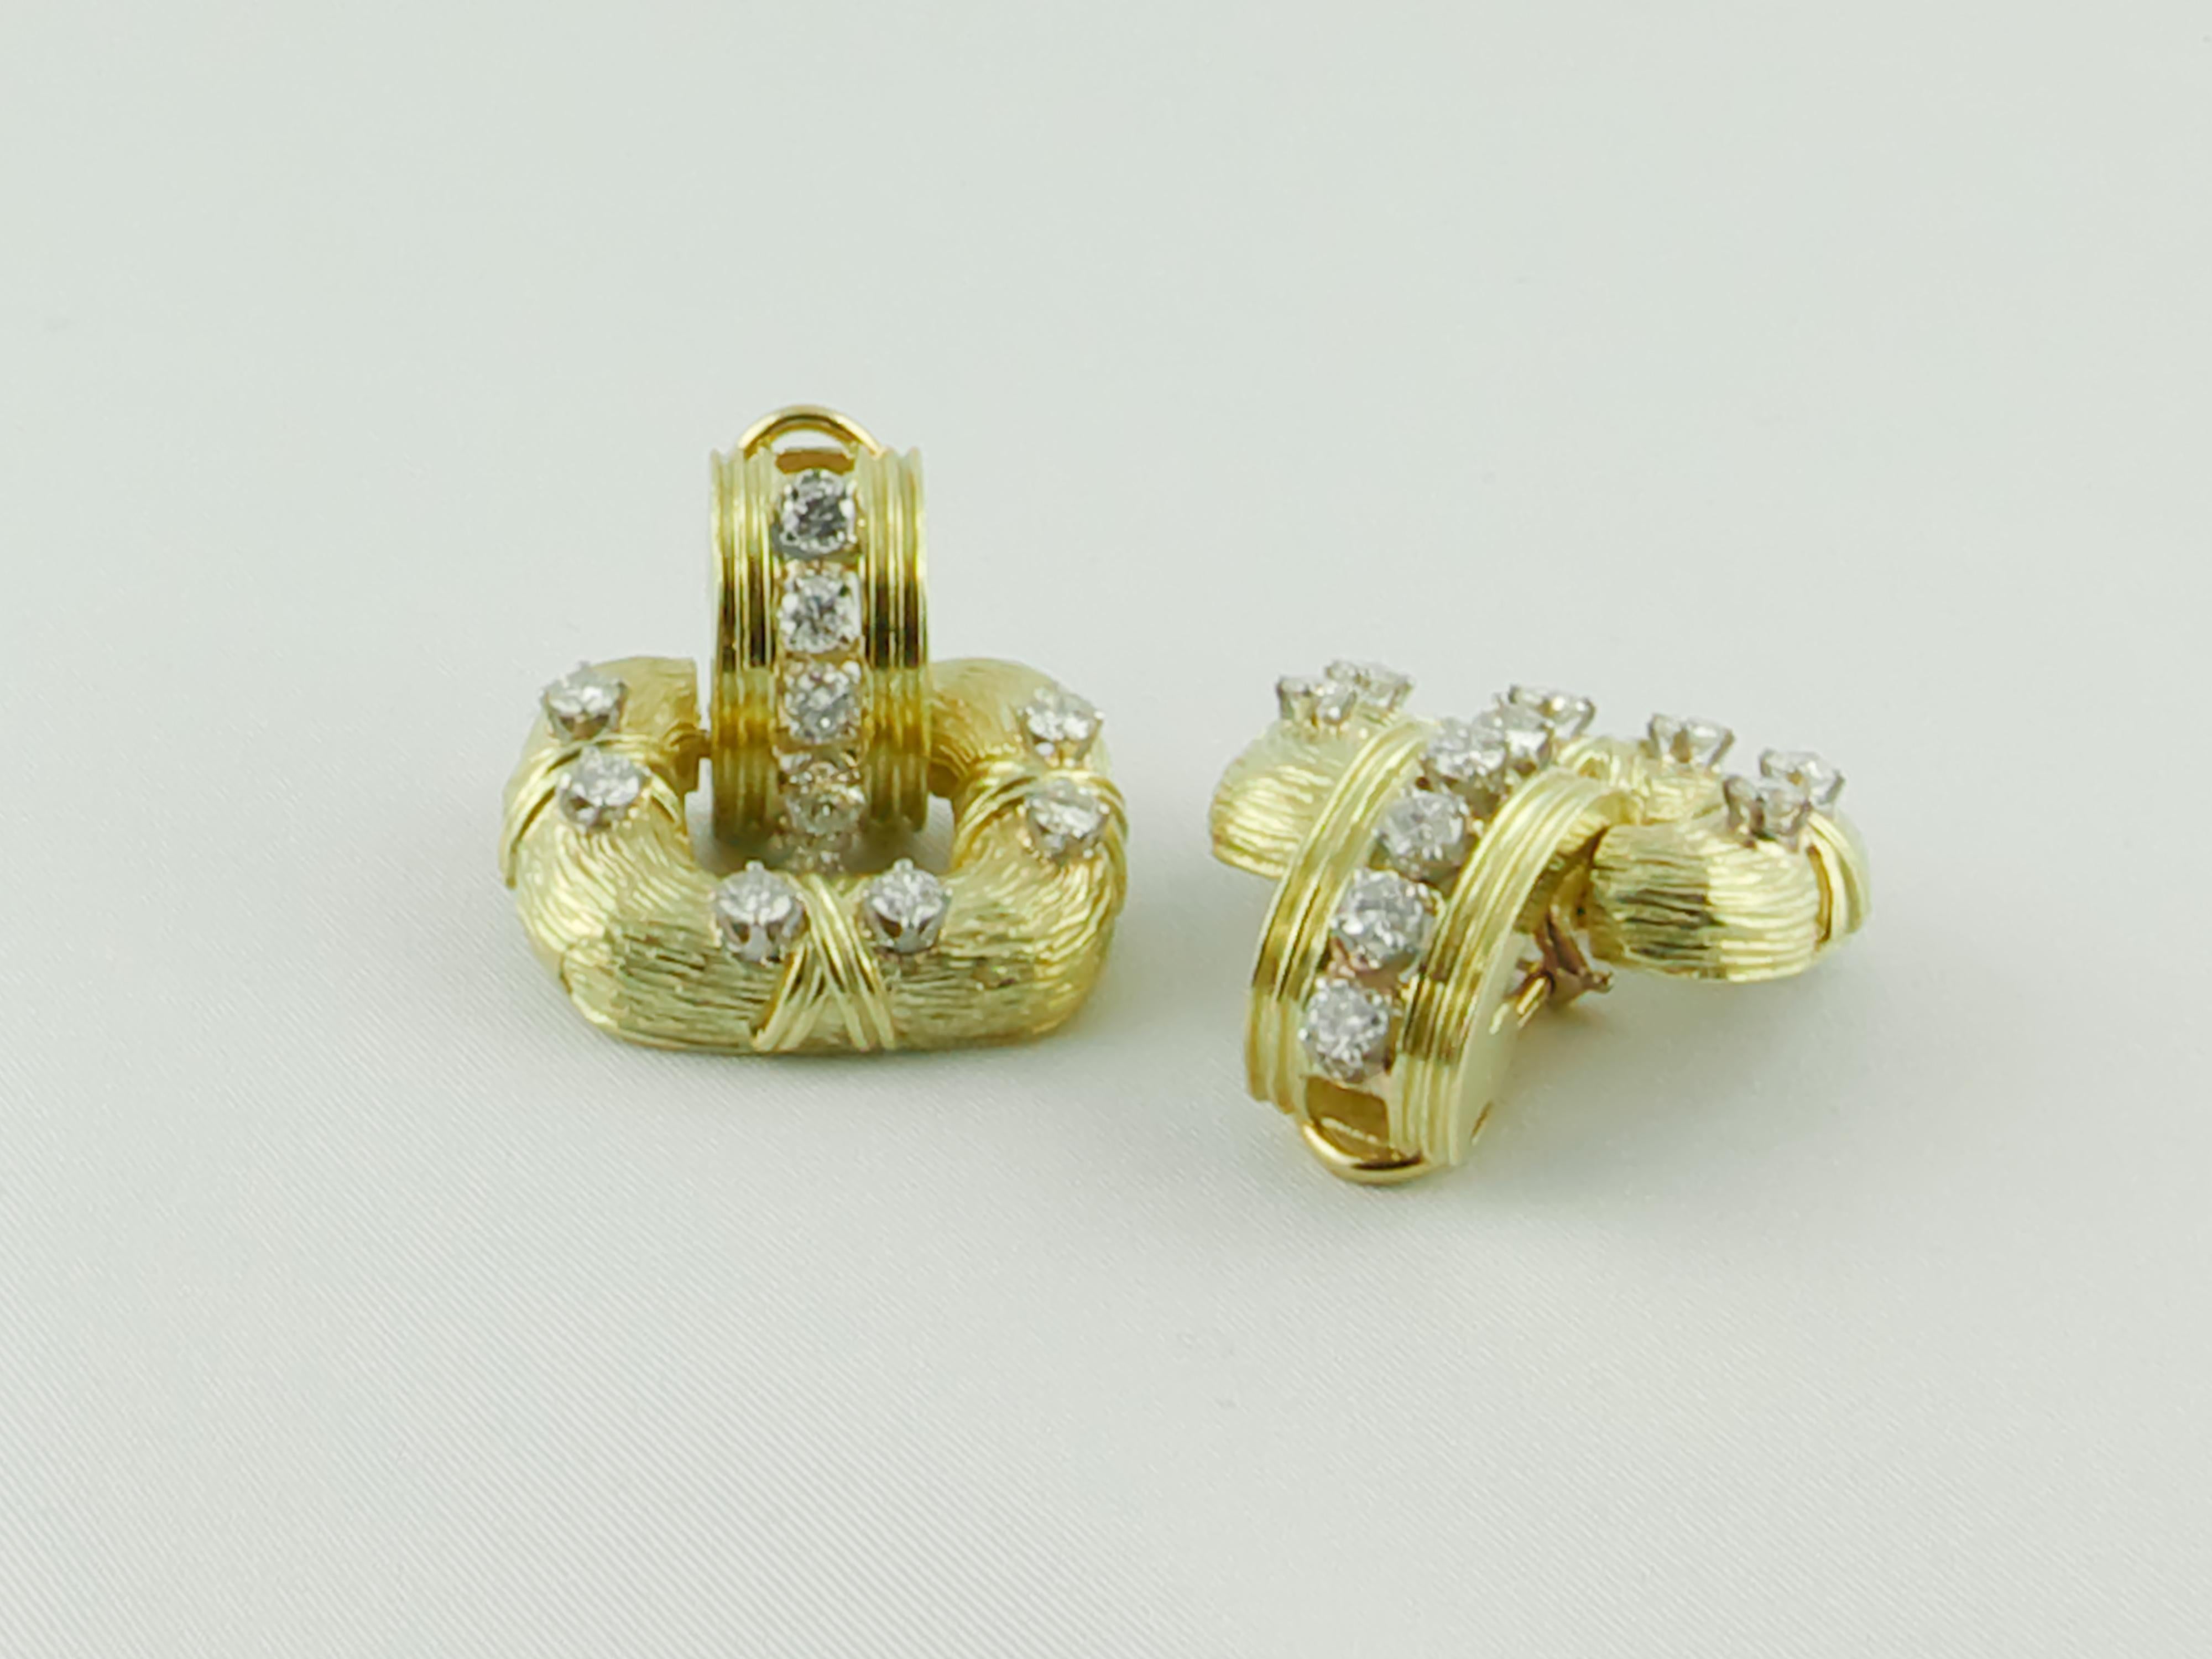 This stunning pair of 18 karat Yellow Gold and Diamonds Earrings was created in the 1970s by La Triomphe
La Triomphe used 18 kt textured Yellow Gold and approx  3cts round brilliant cut sparkling Diamonds to create an elegant Earring set. 
Crafted